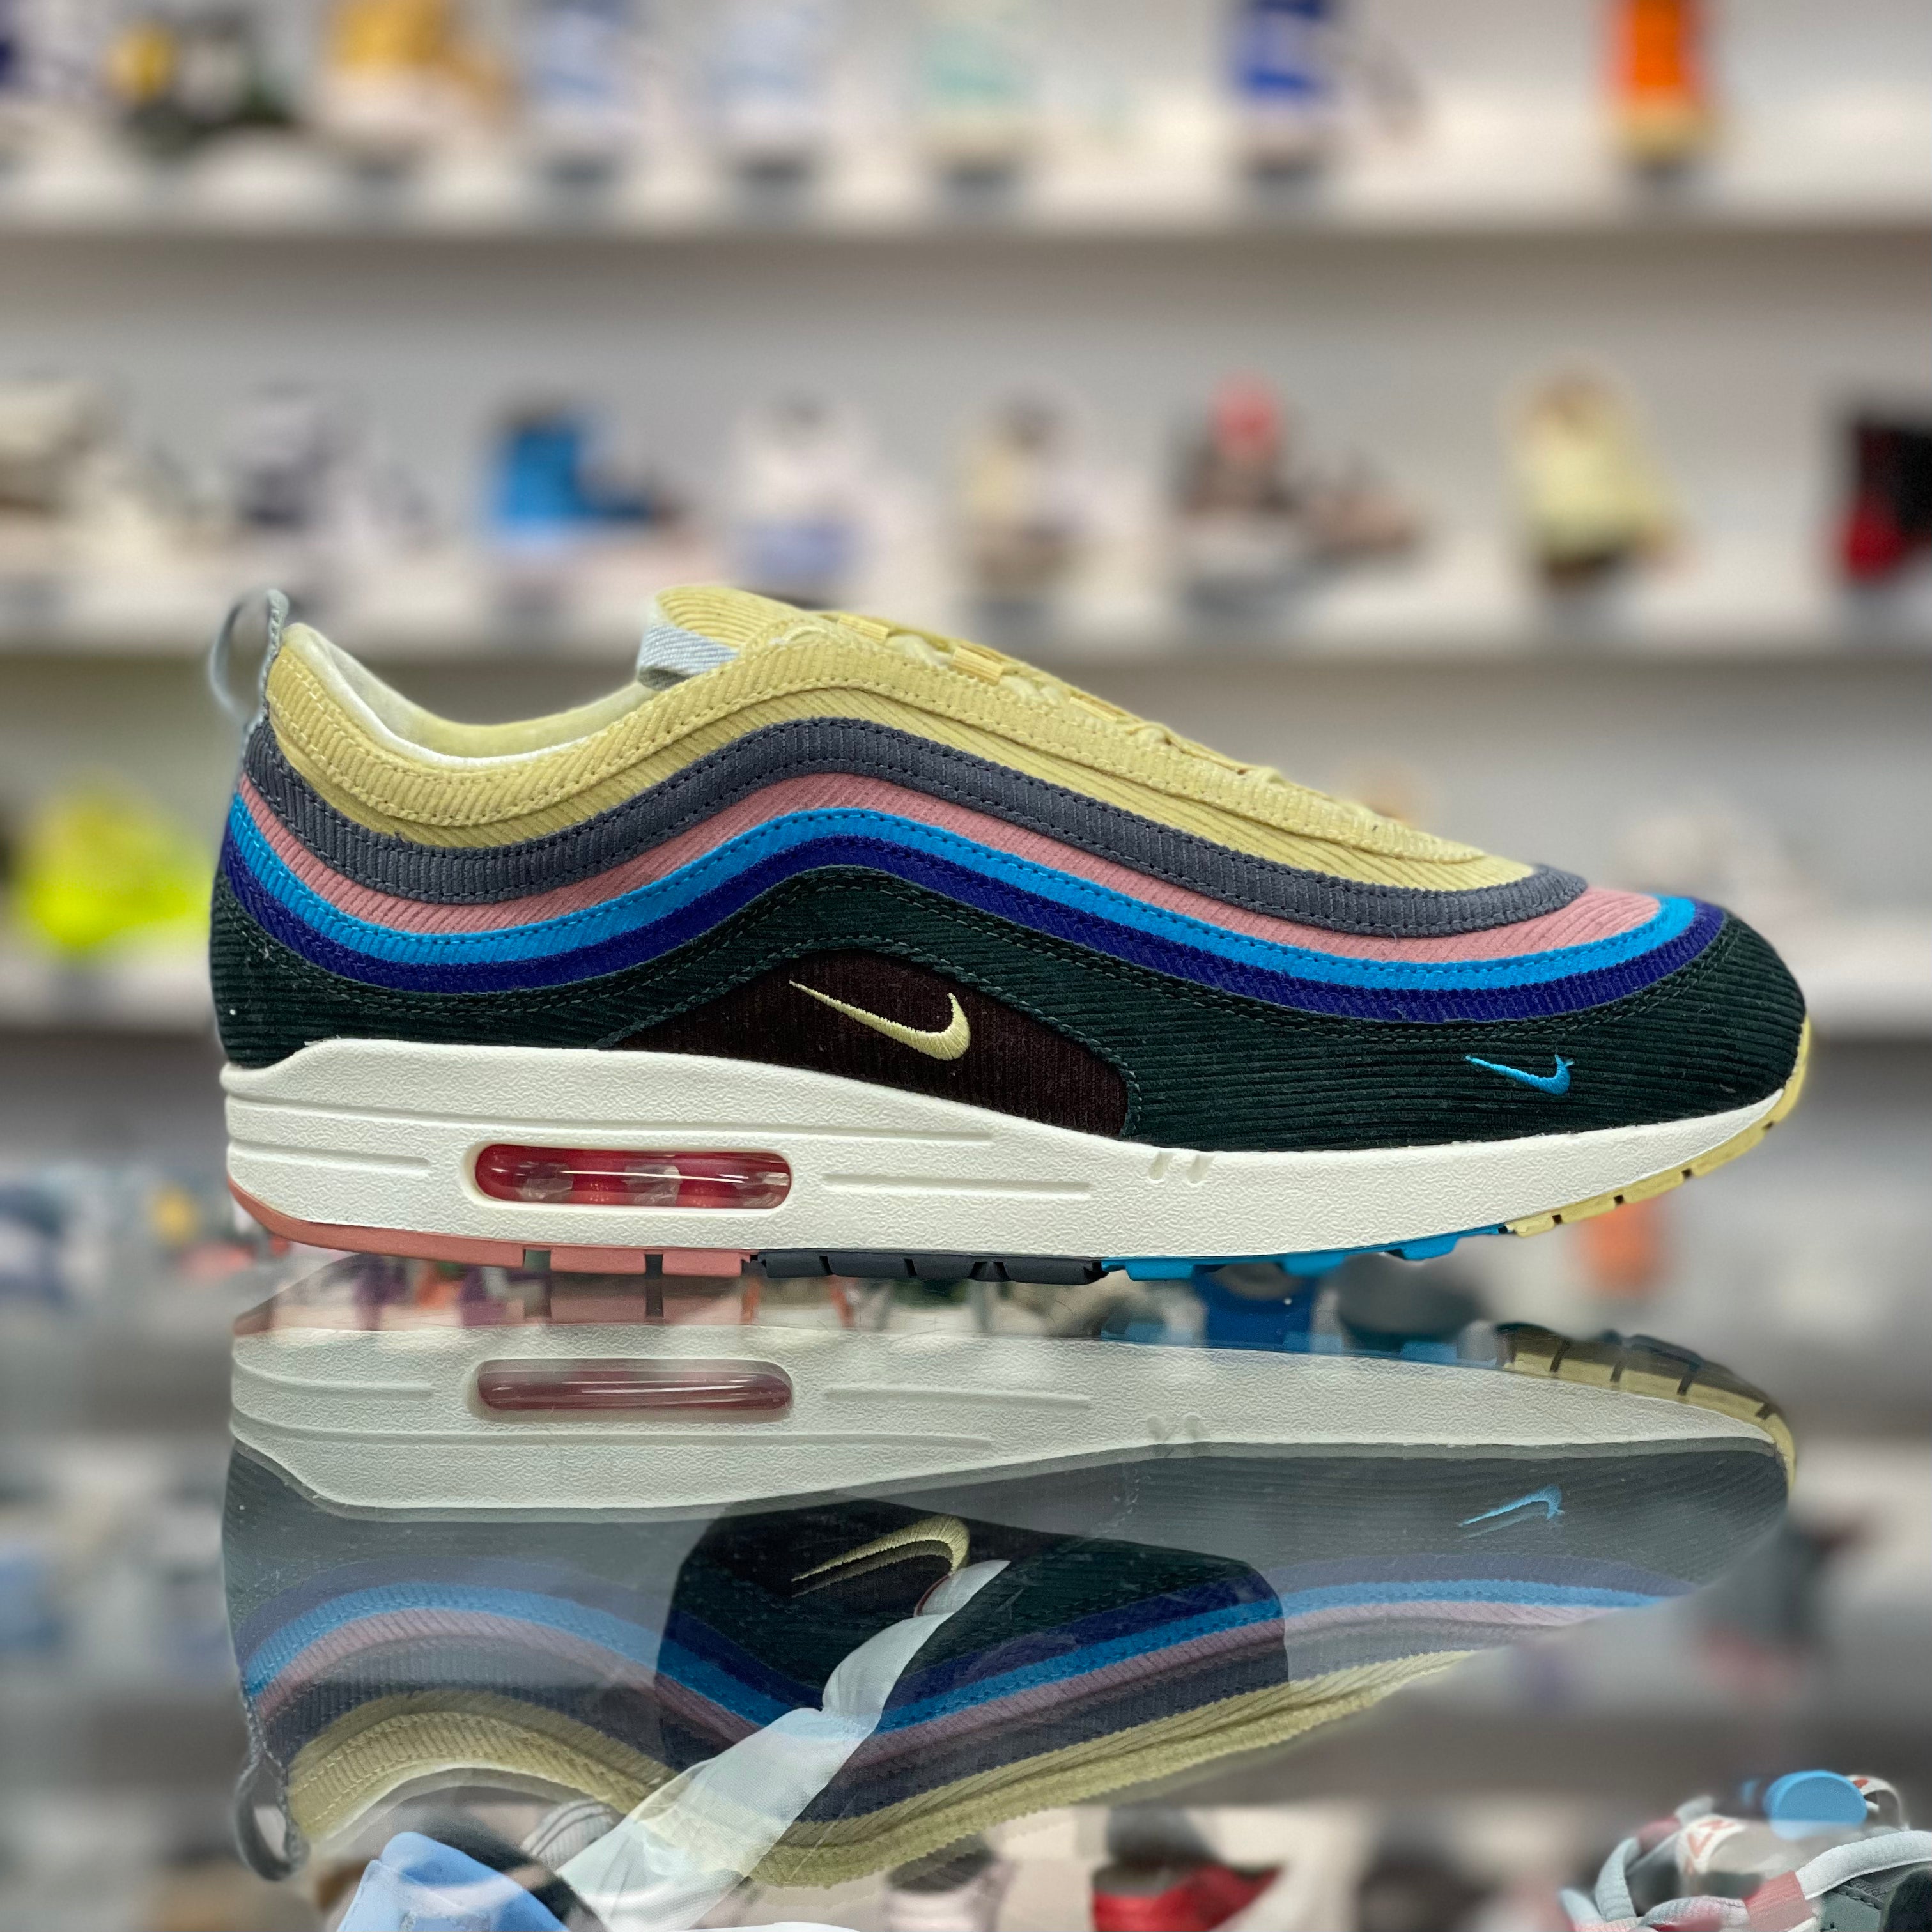 Air Max 97/1 “Sean Wotherspoon”